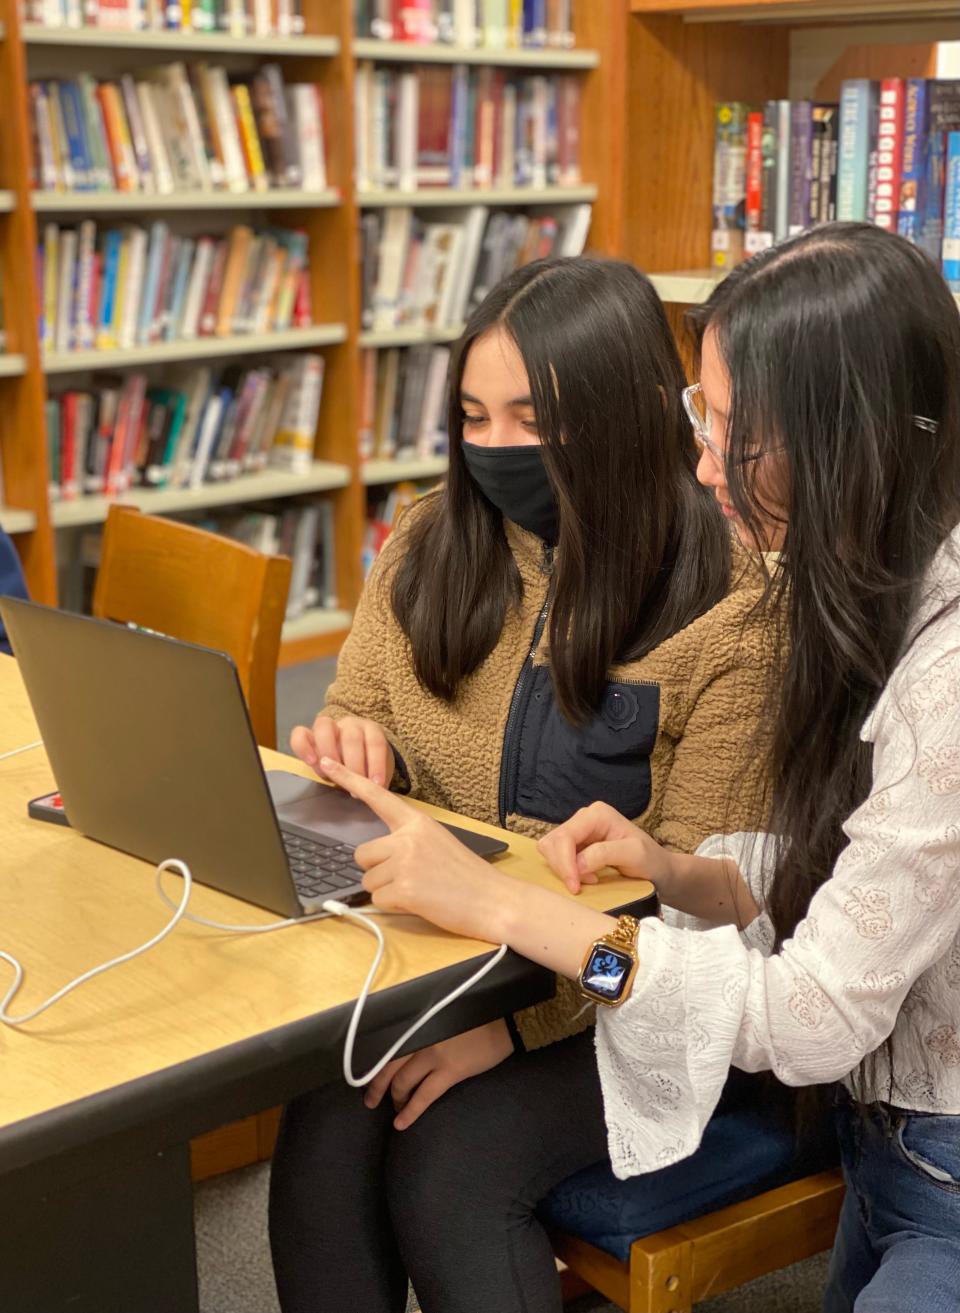 Nora Sun (right), 17, helps a student participant in one of the nonprofits she founded to advocate for girls pursuing studies or careers in science, technology, engineering or mathematics.